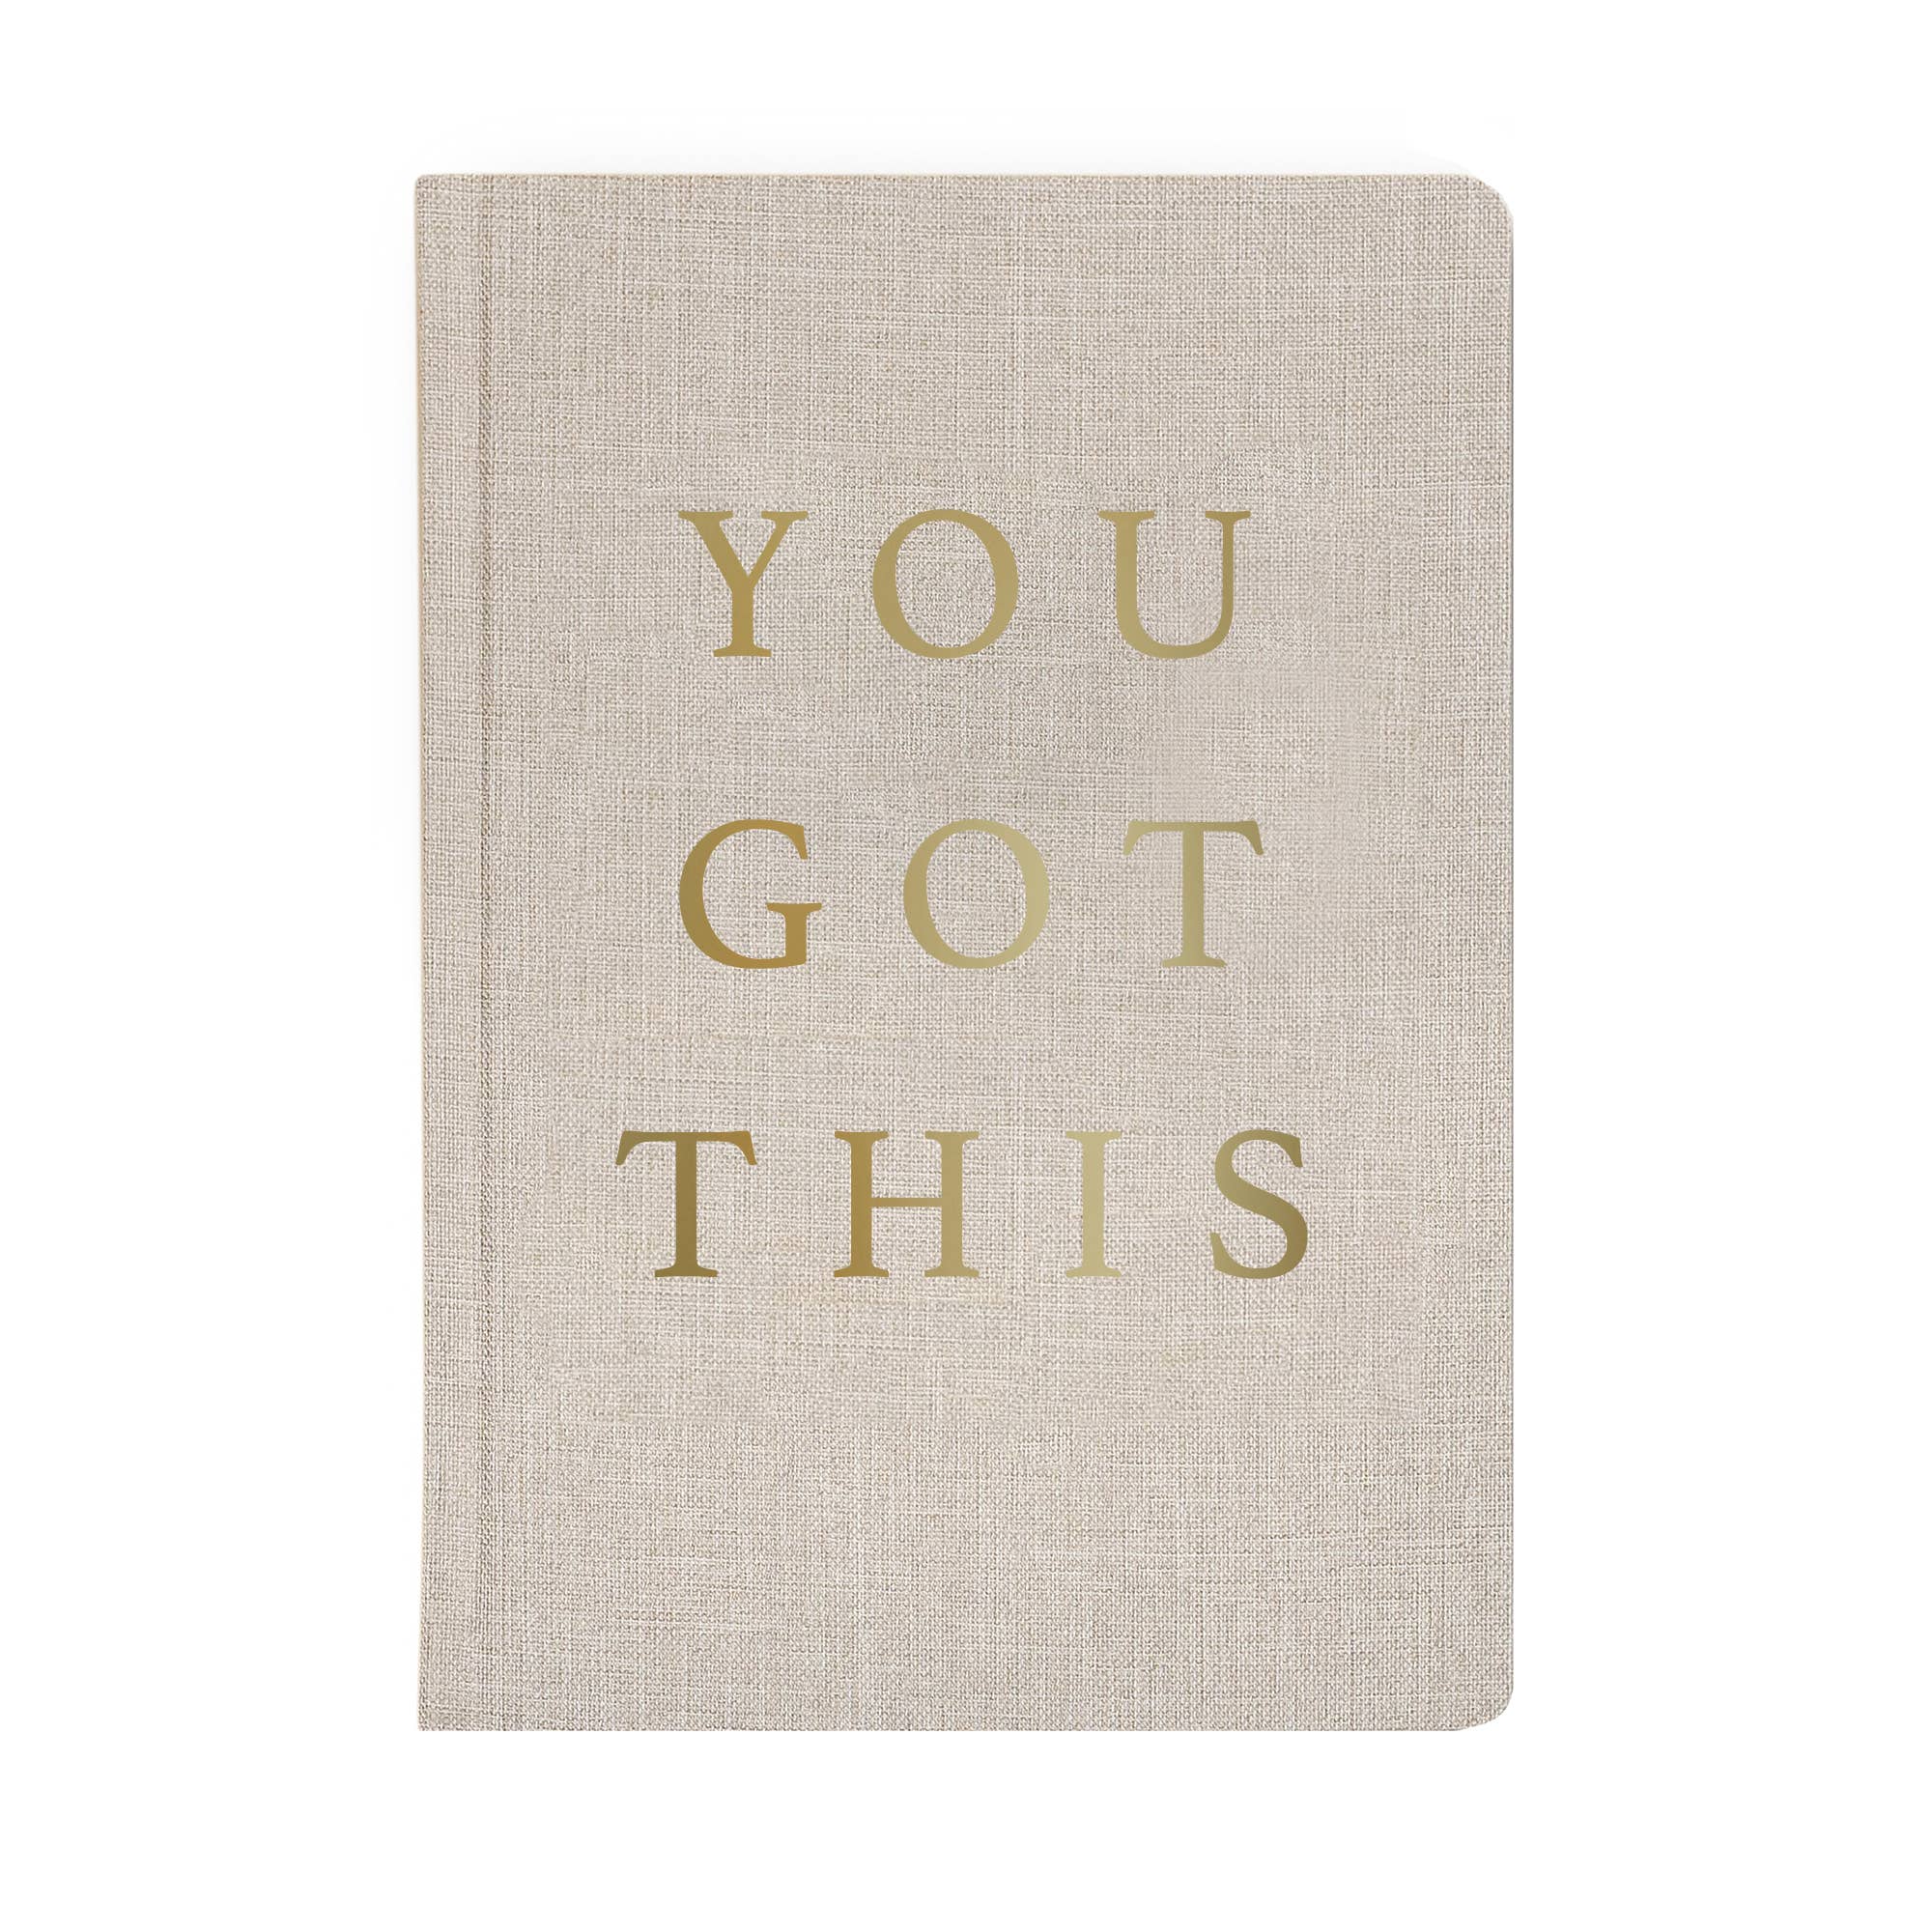 You Got This - Tan and Gold Foil Fabric Journal - JMCandles and Home